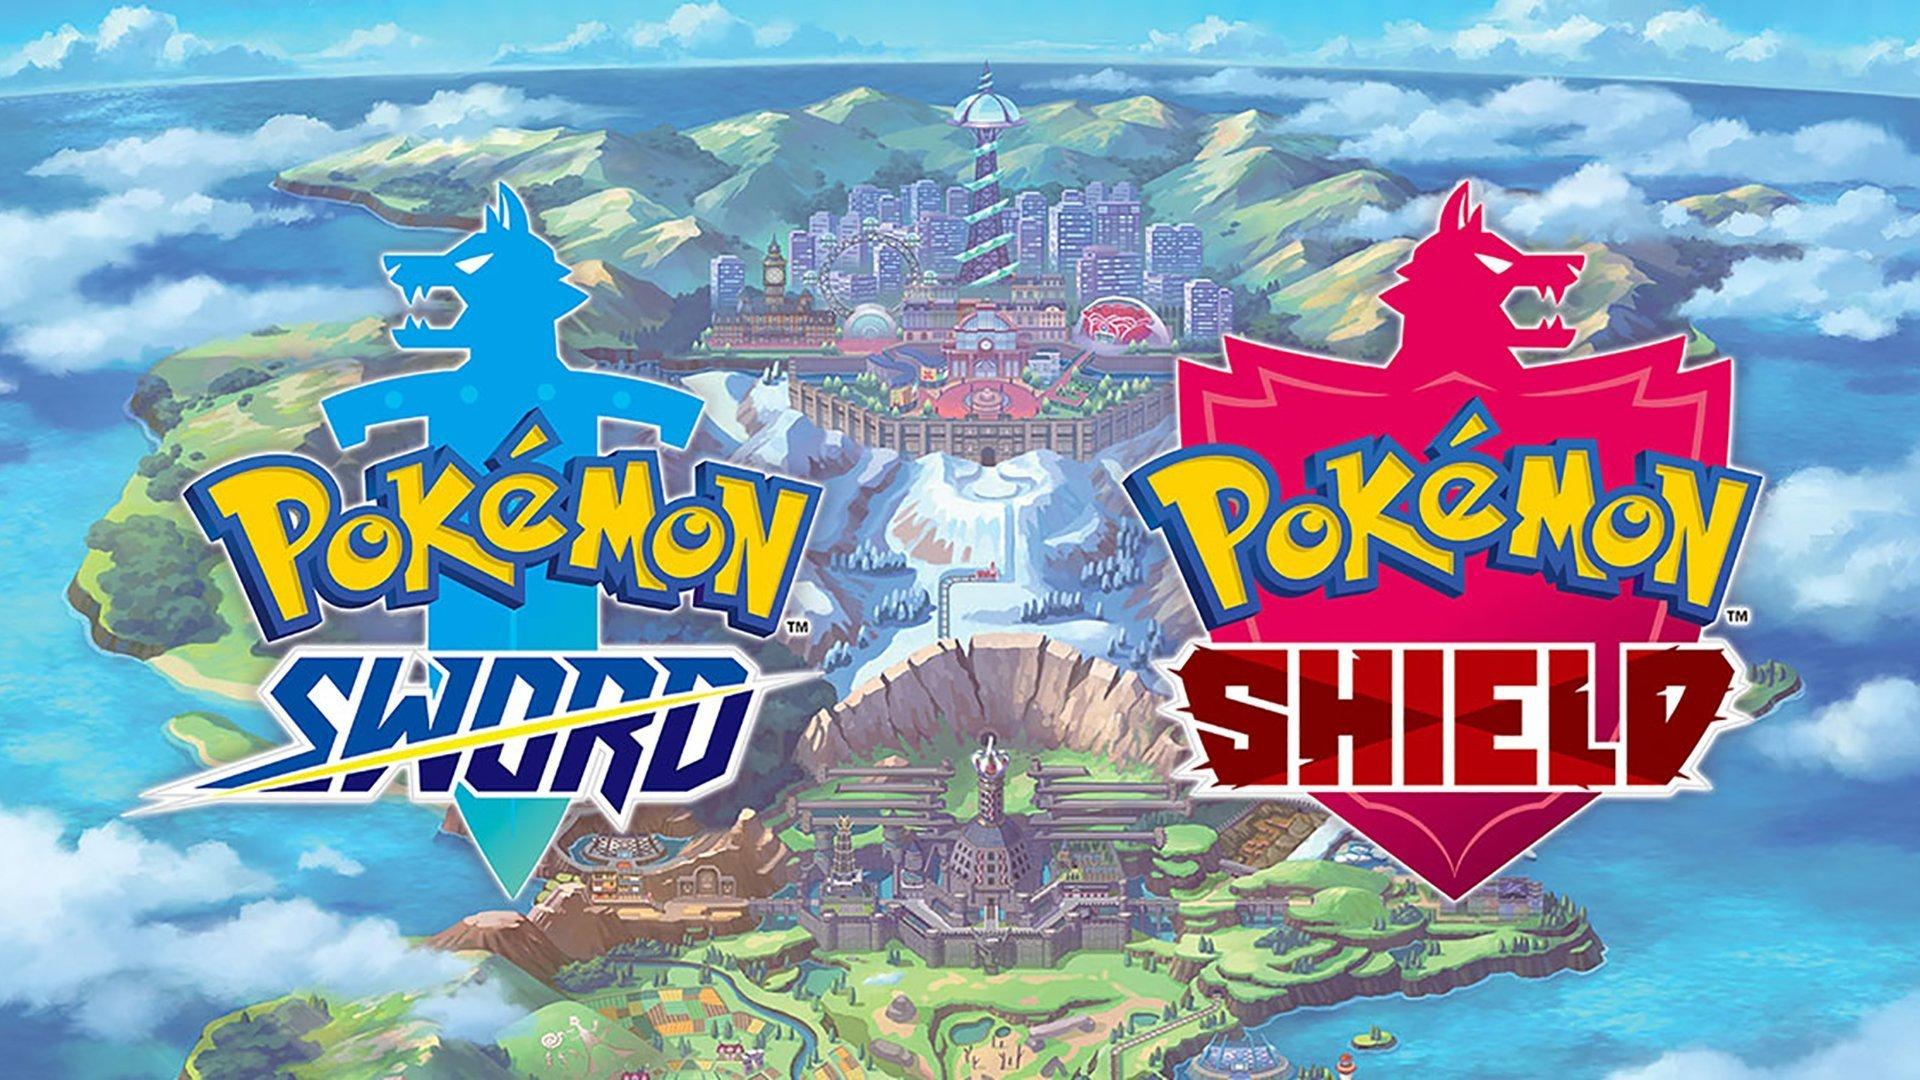 New Pokémon Sword and Shield news coming on August 7